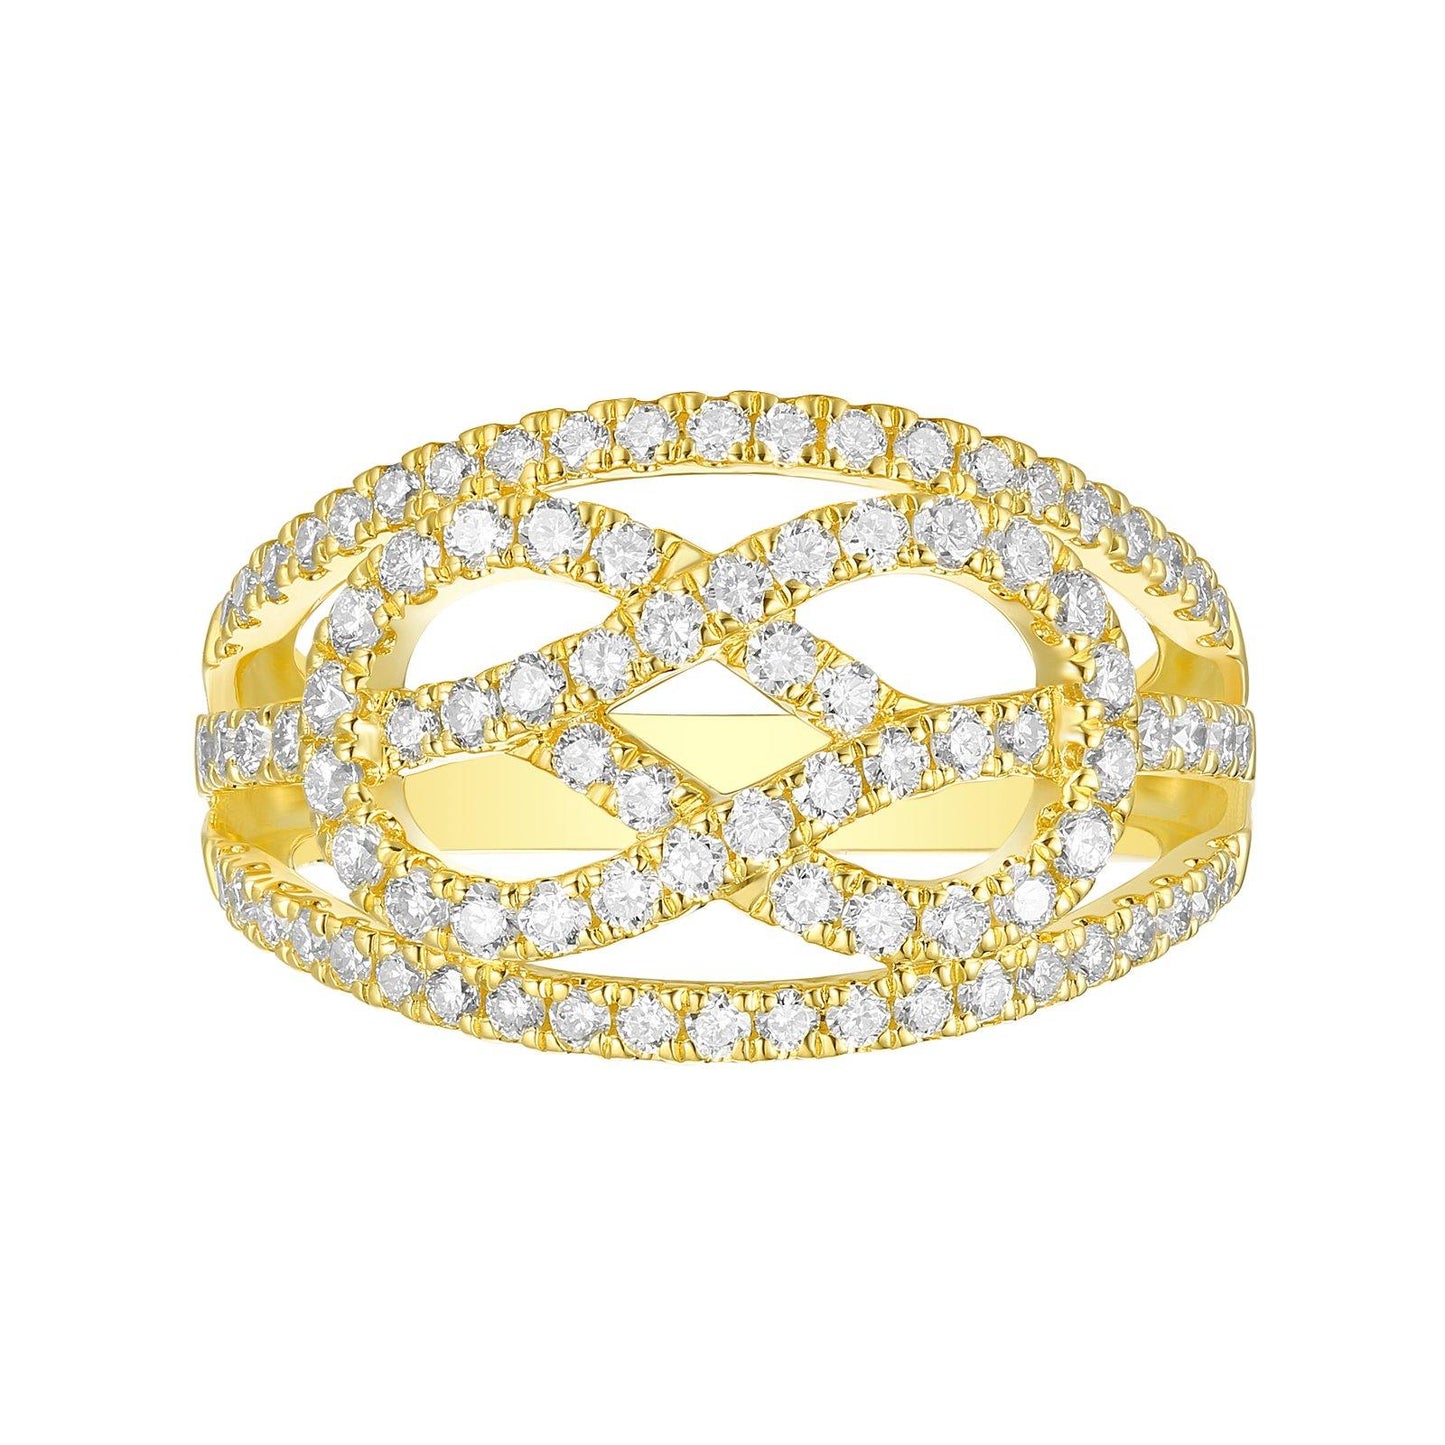 Limitless Collection Lab Grown Diamond Ring Ring Analucia Beltran Diamonds 14 kt yellow gold plated